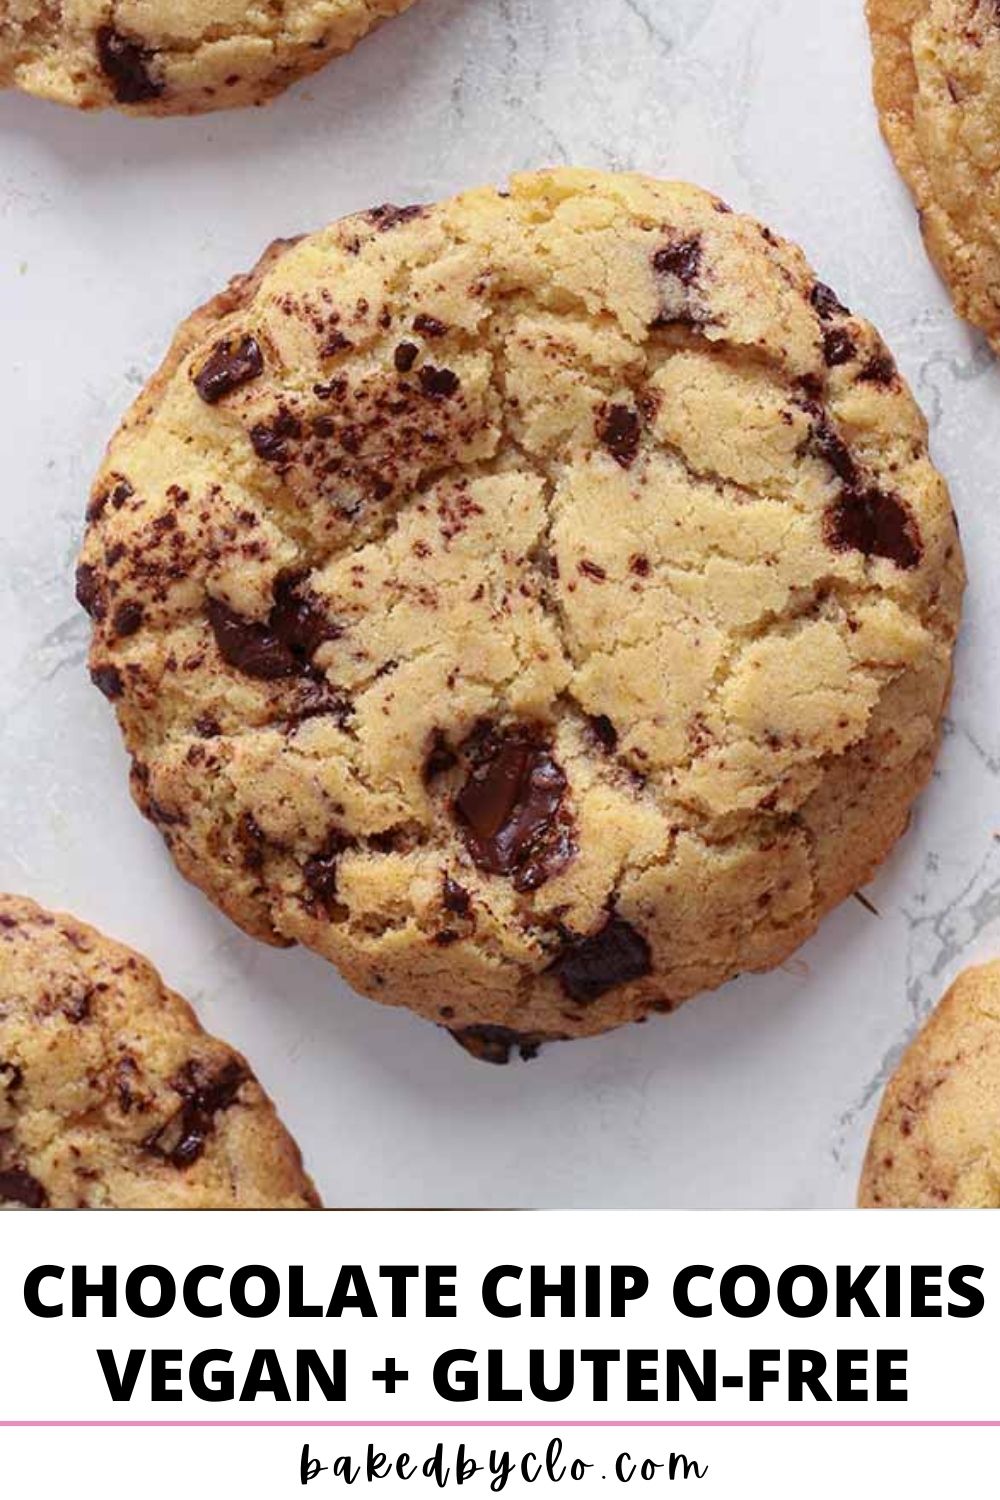 Pinterest Pin- image of cookie alongside black text that reads "chocolate chip cookies vegan+gluten-free"